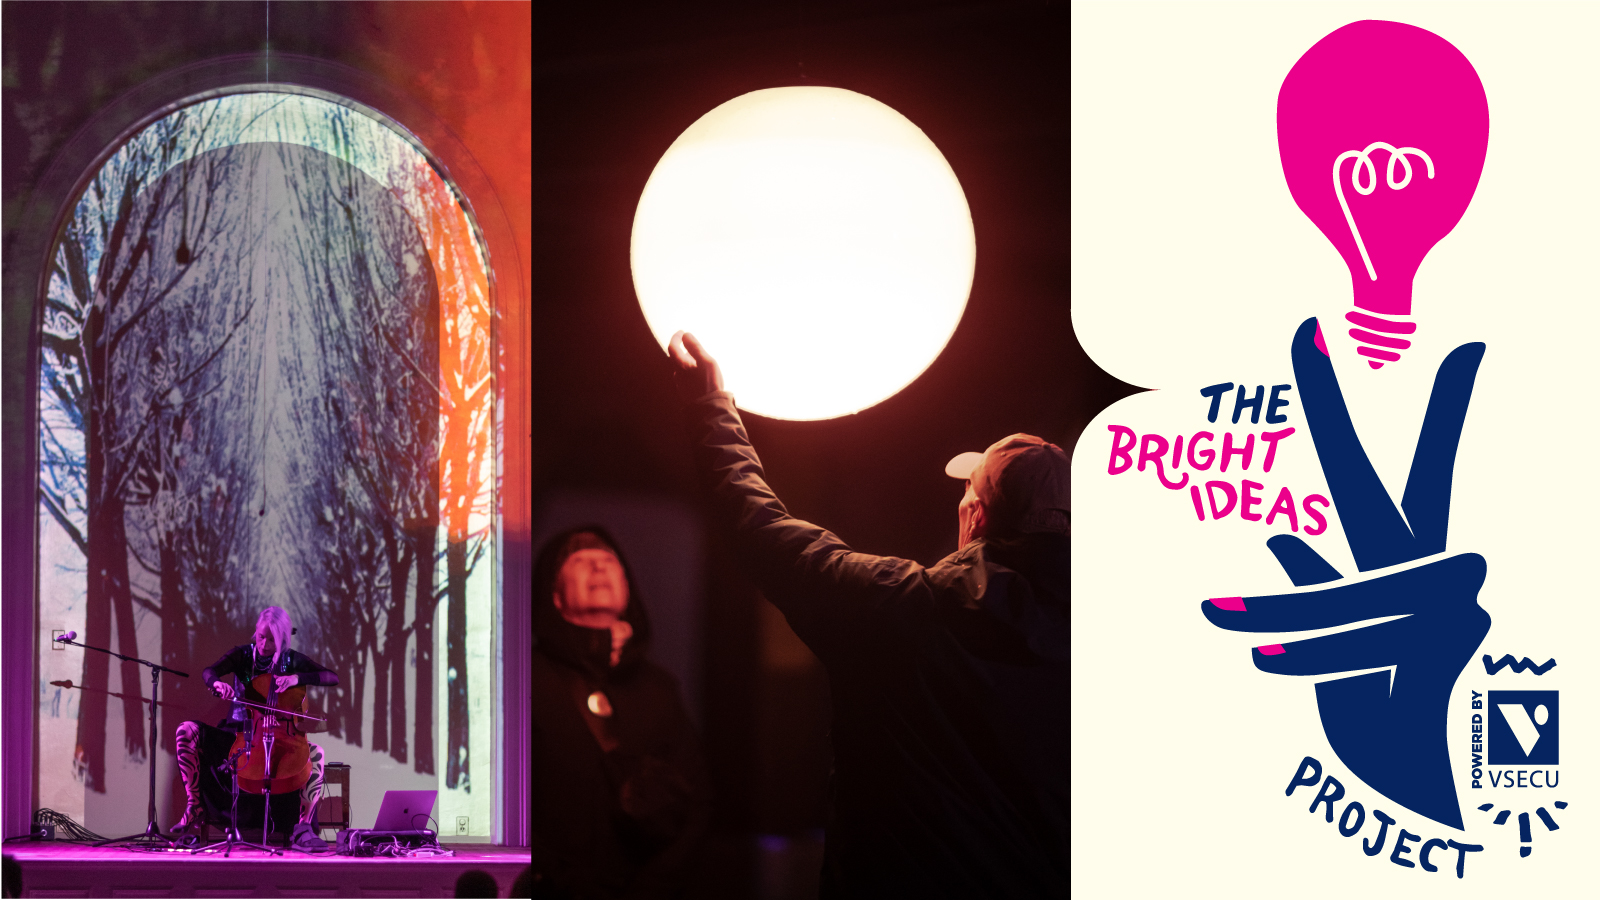 An image divided in three sections. To the left a woman plays a cello on stage while purple and orange lights project an image of an arch and tree lined lane over her. In the center two people reach up to touch a glowing yellow orb. To the right an illustration of a navy blue hand pointing up to a hot pink light bulb and The Bright Ideas Project Powered by VSECU